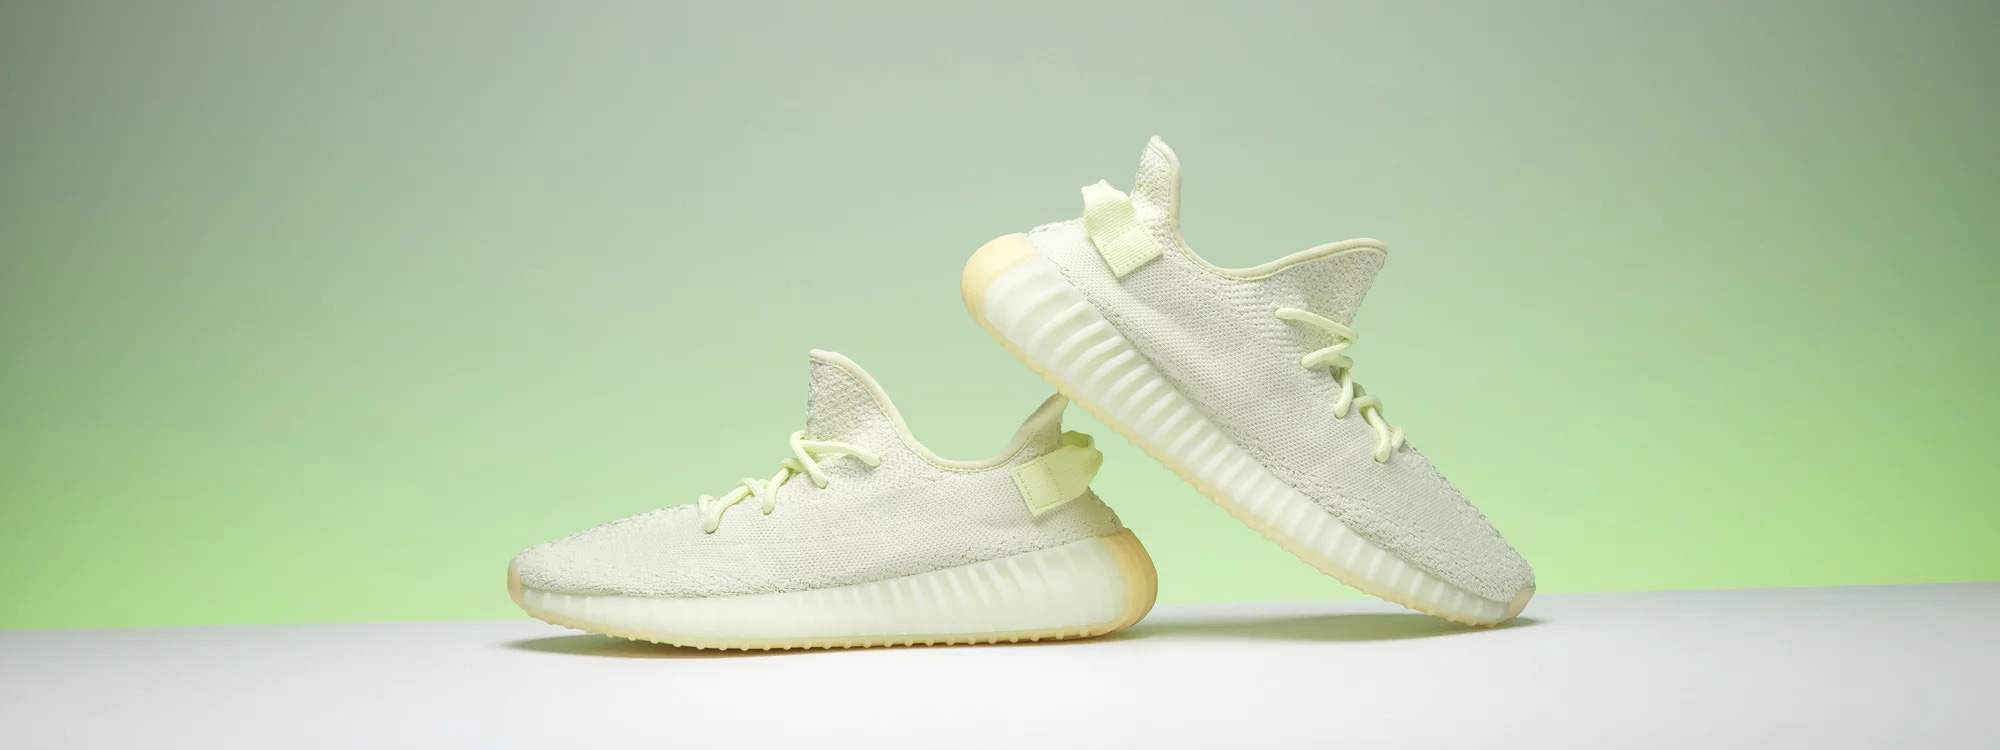 The best Adidas Yeezy Boost 350 V2 Butter online